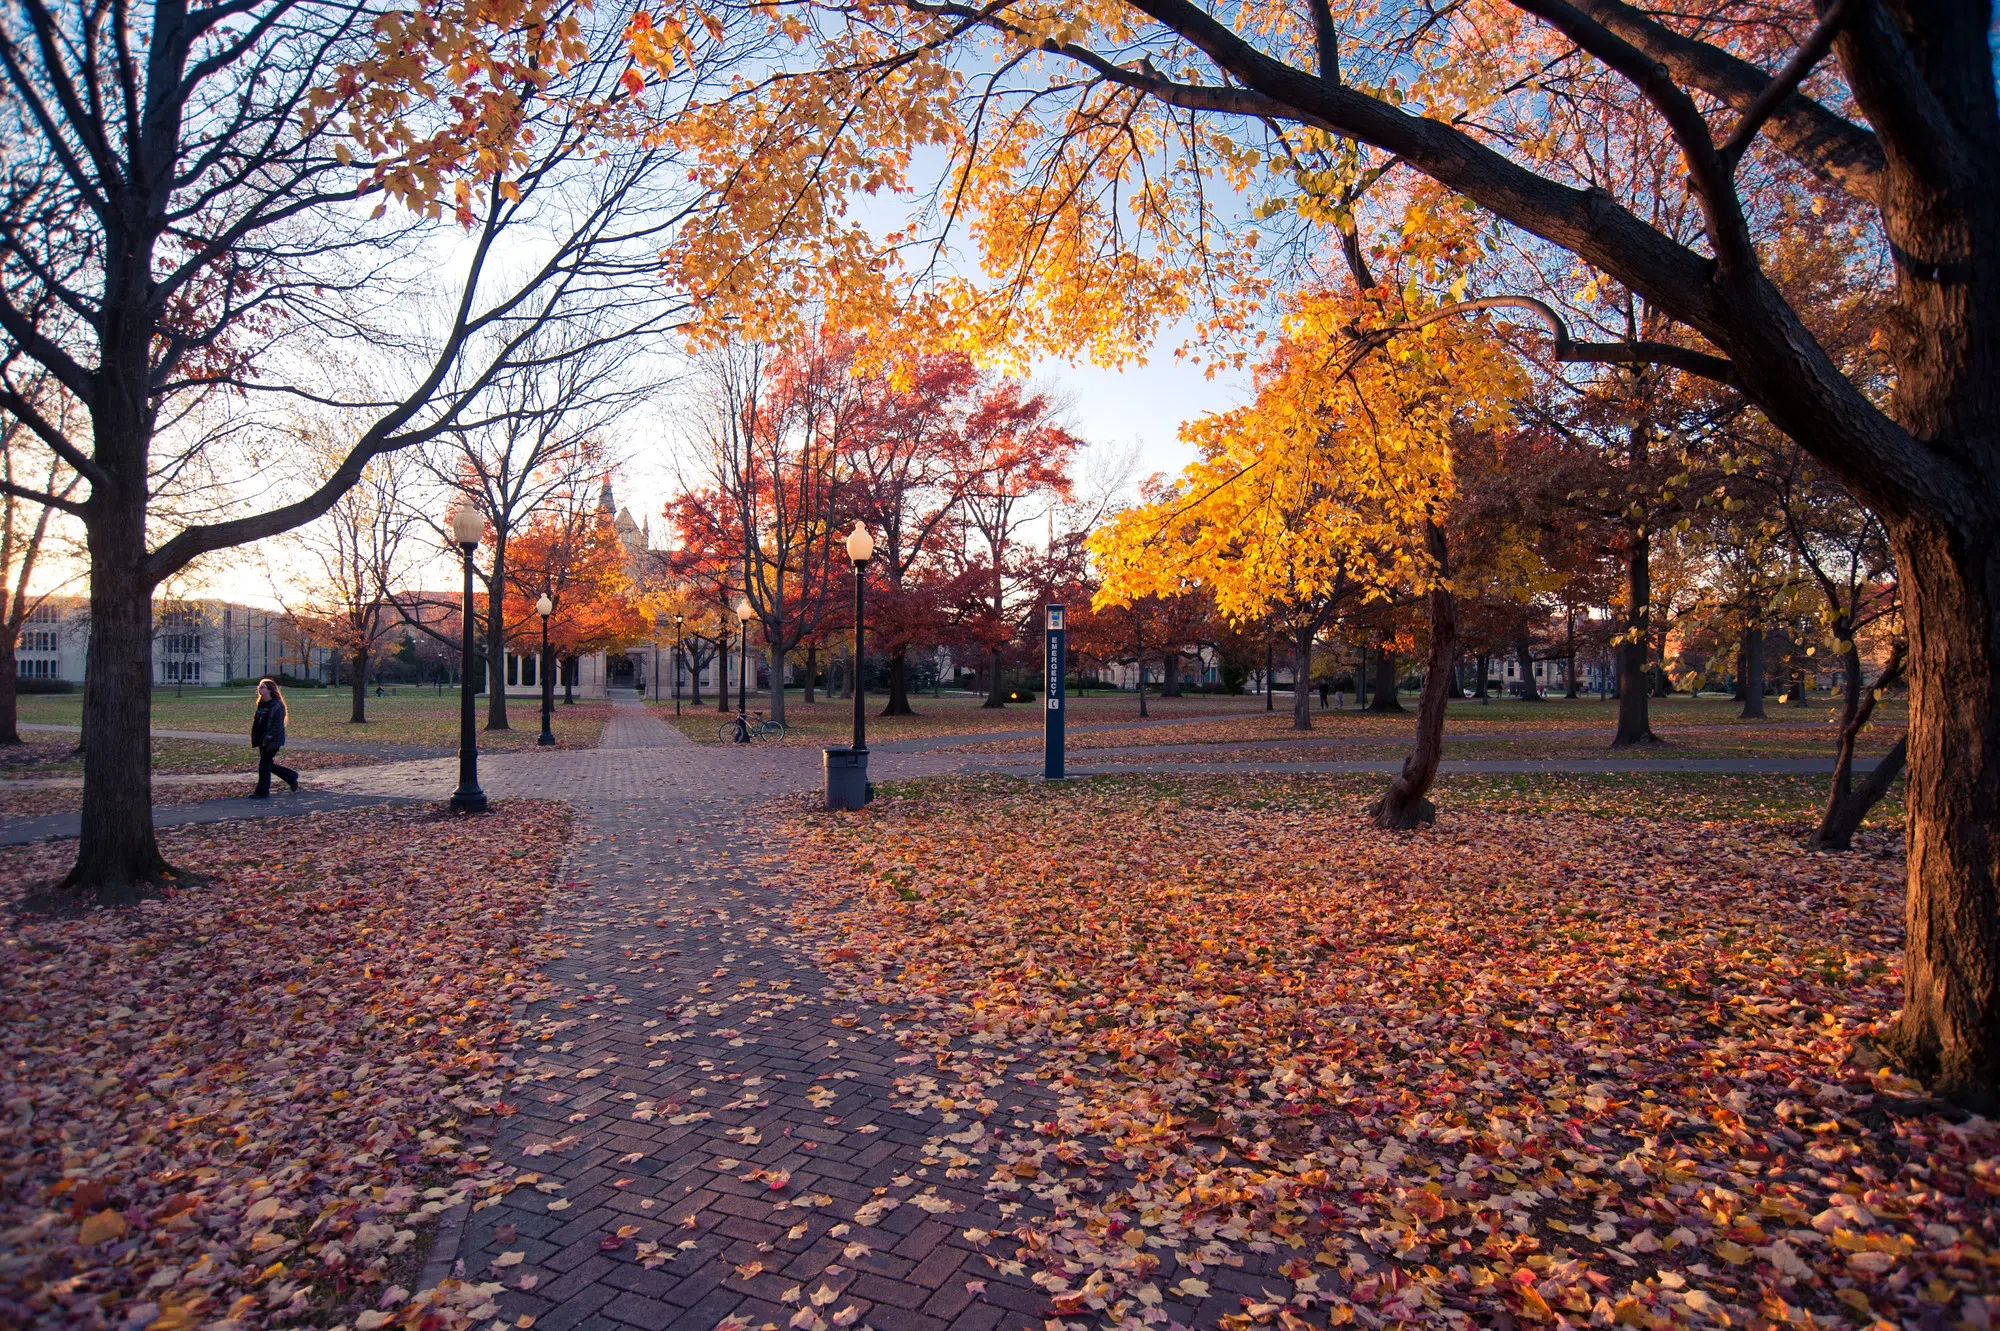 The middle of Tappan Square is covered by bright red, yellow, and orange leaves,